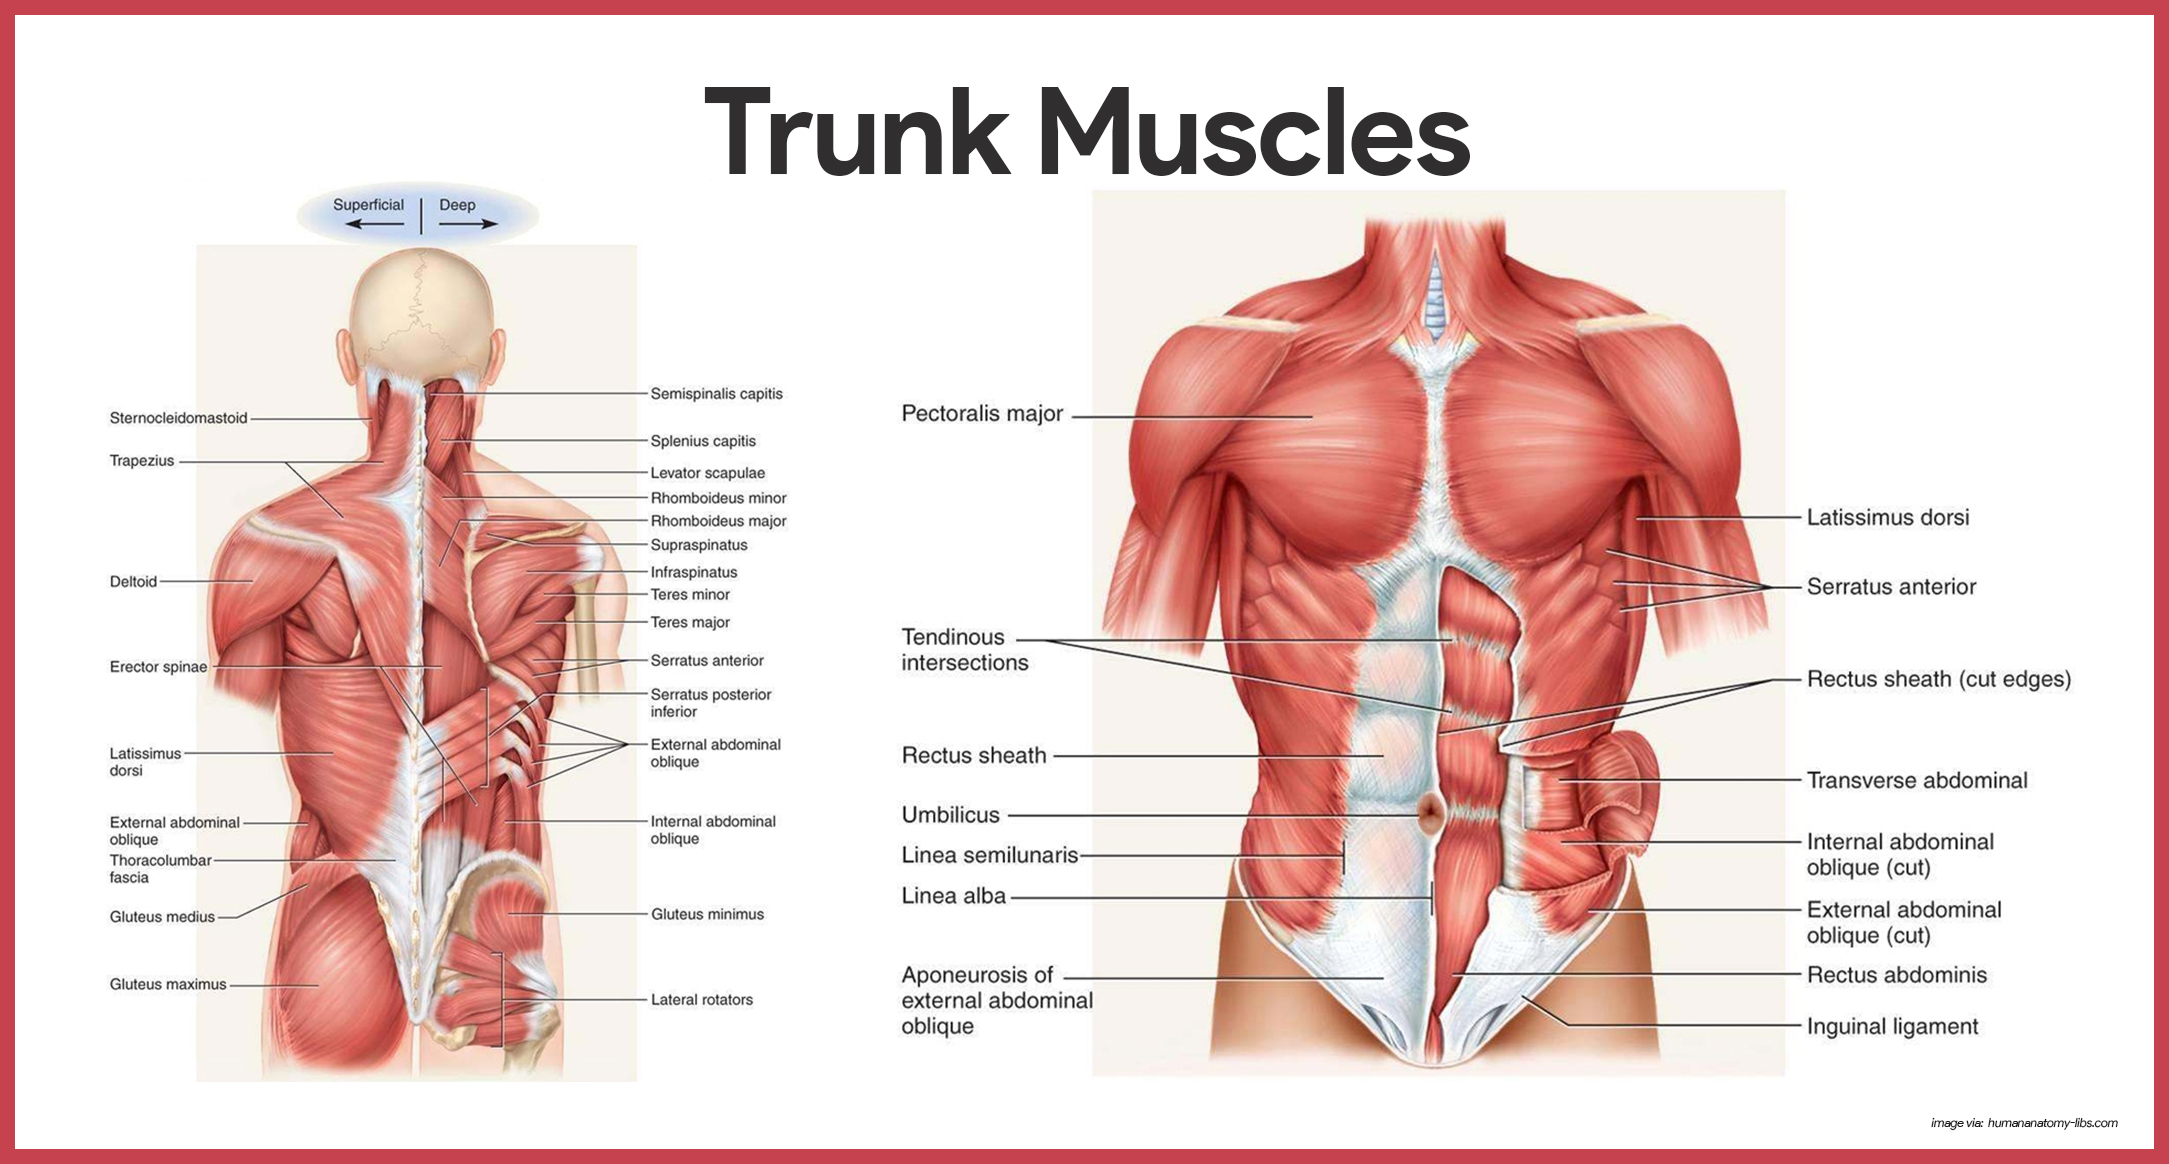 Trunk Muscles- Muscular System